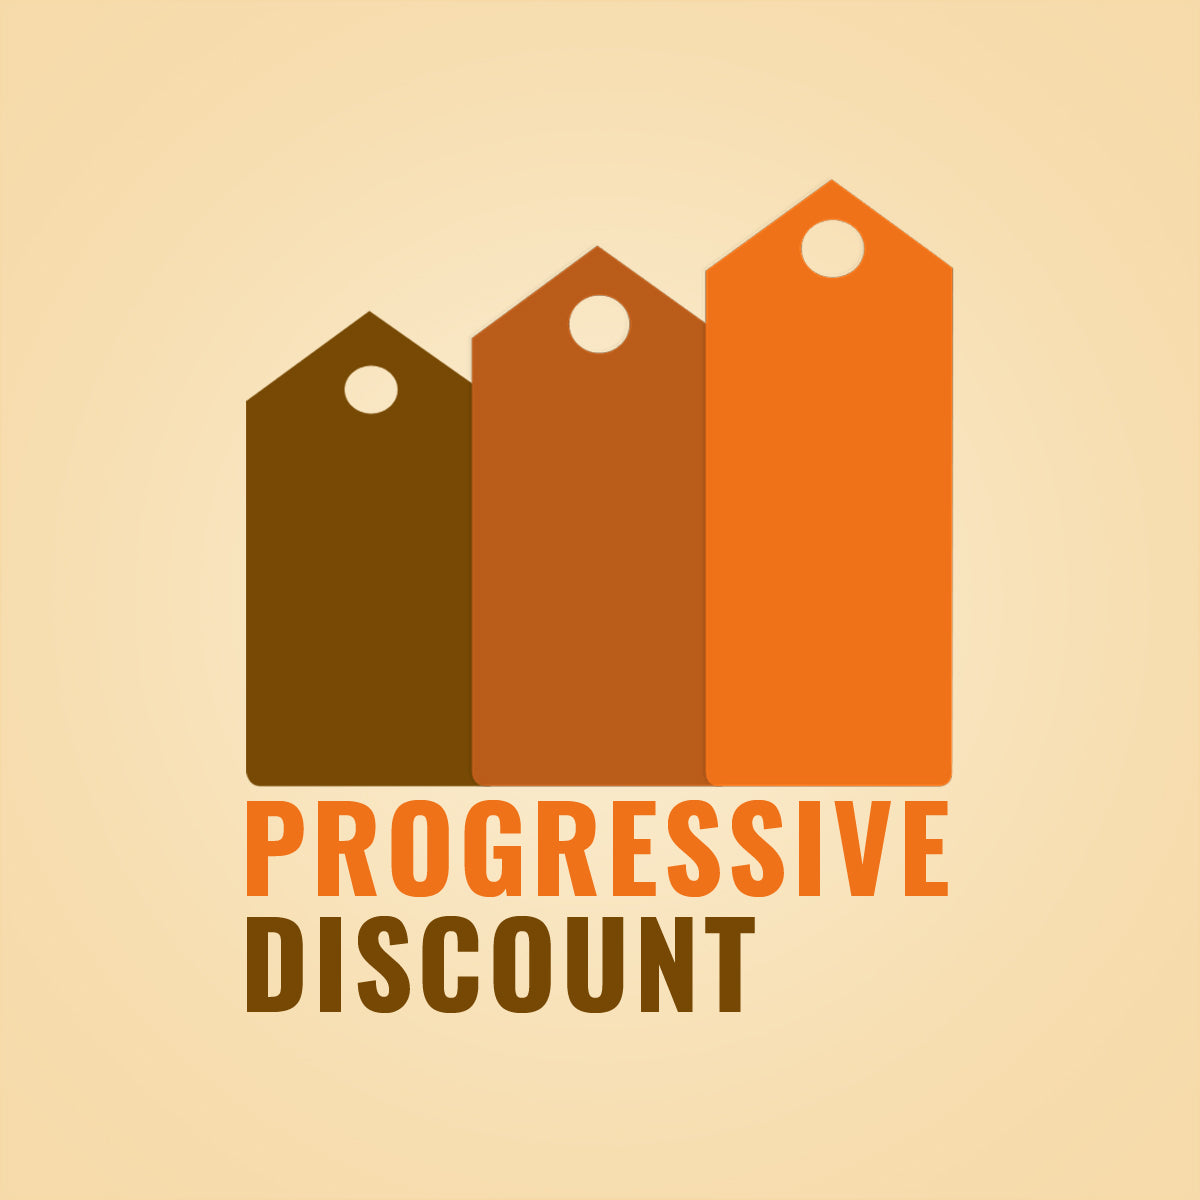 Progressive Discount by VGroup for Shopify